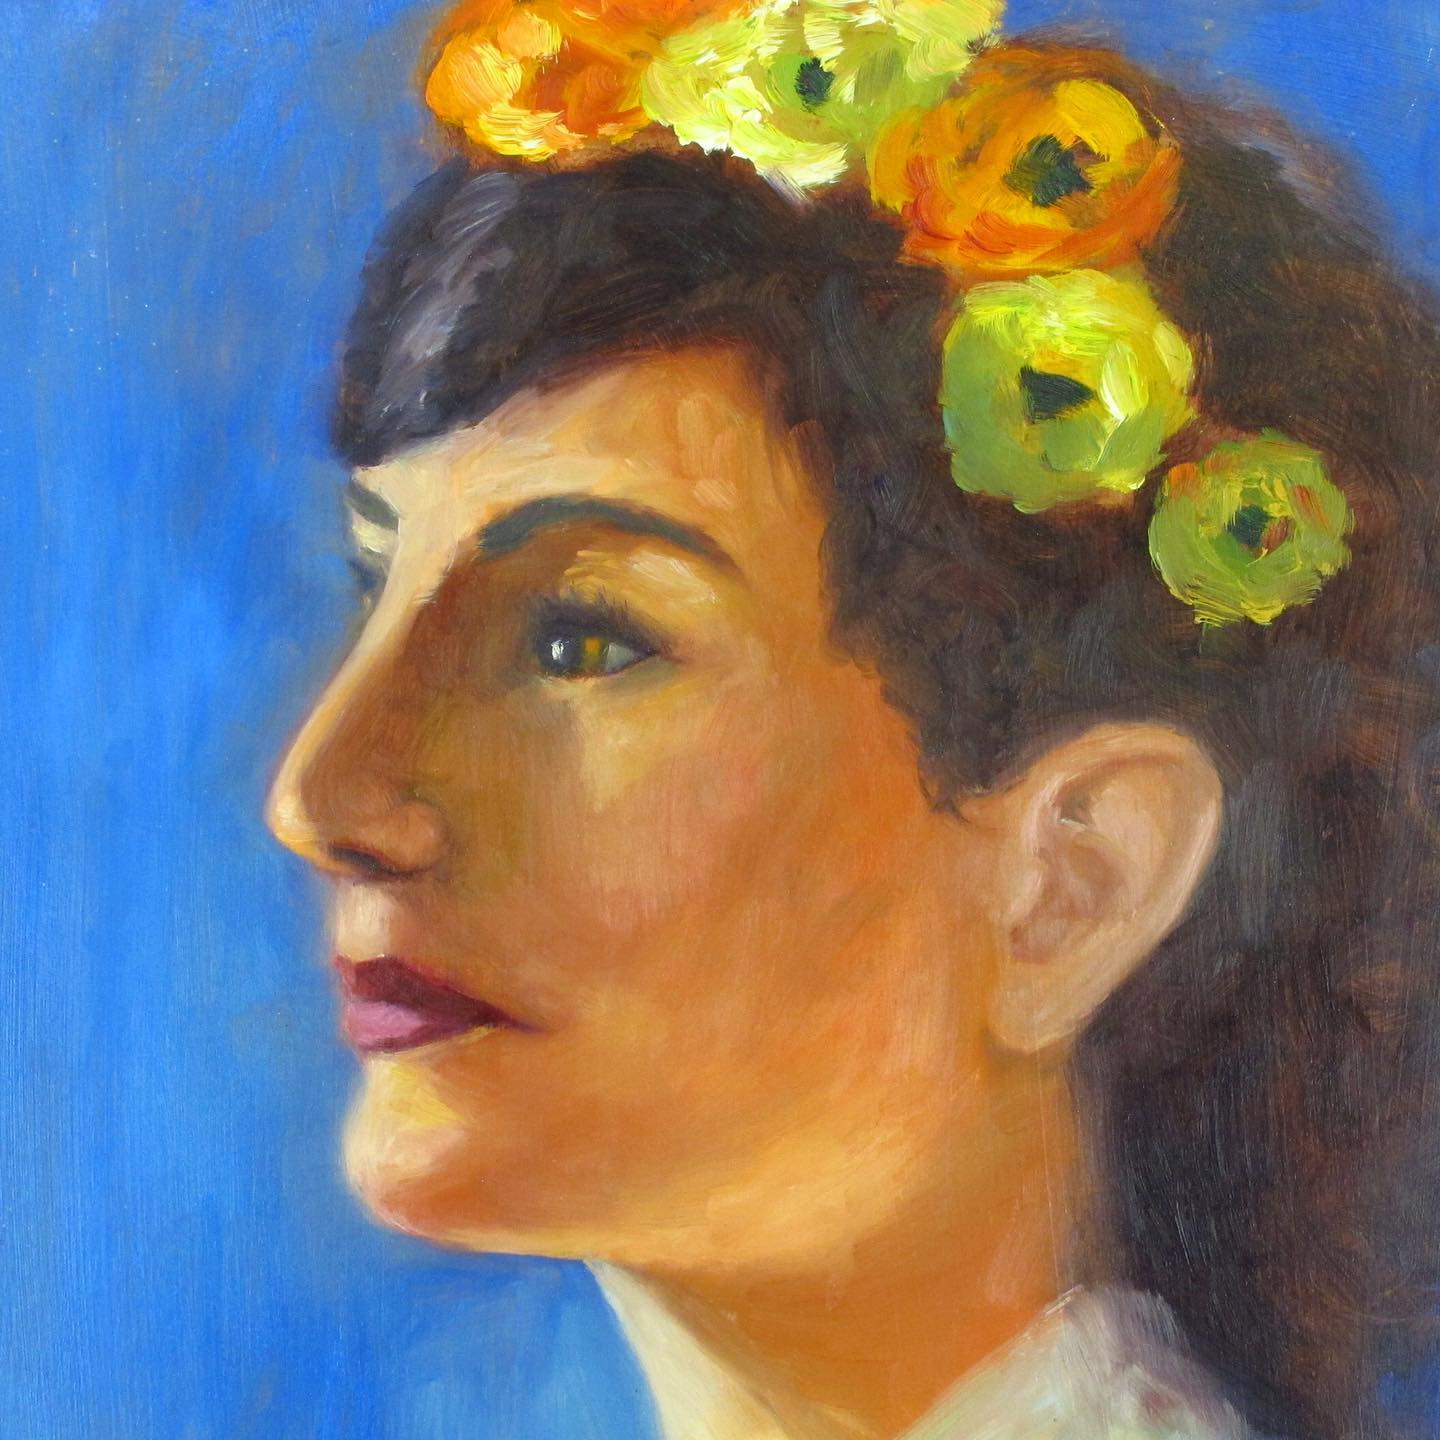 Portrait Oil on Board of Woman with Flowers in her Hair, c. 1970